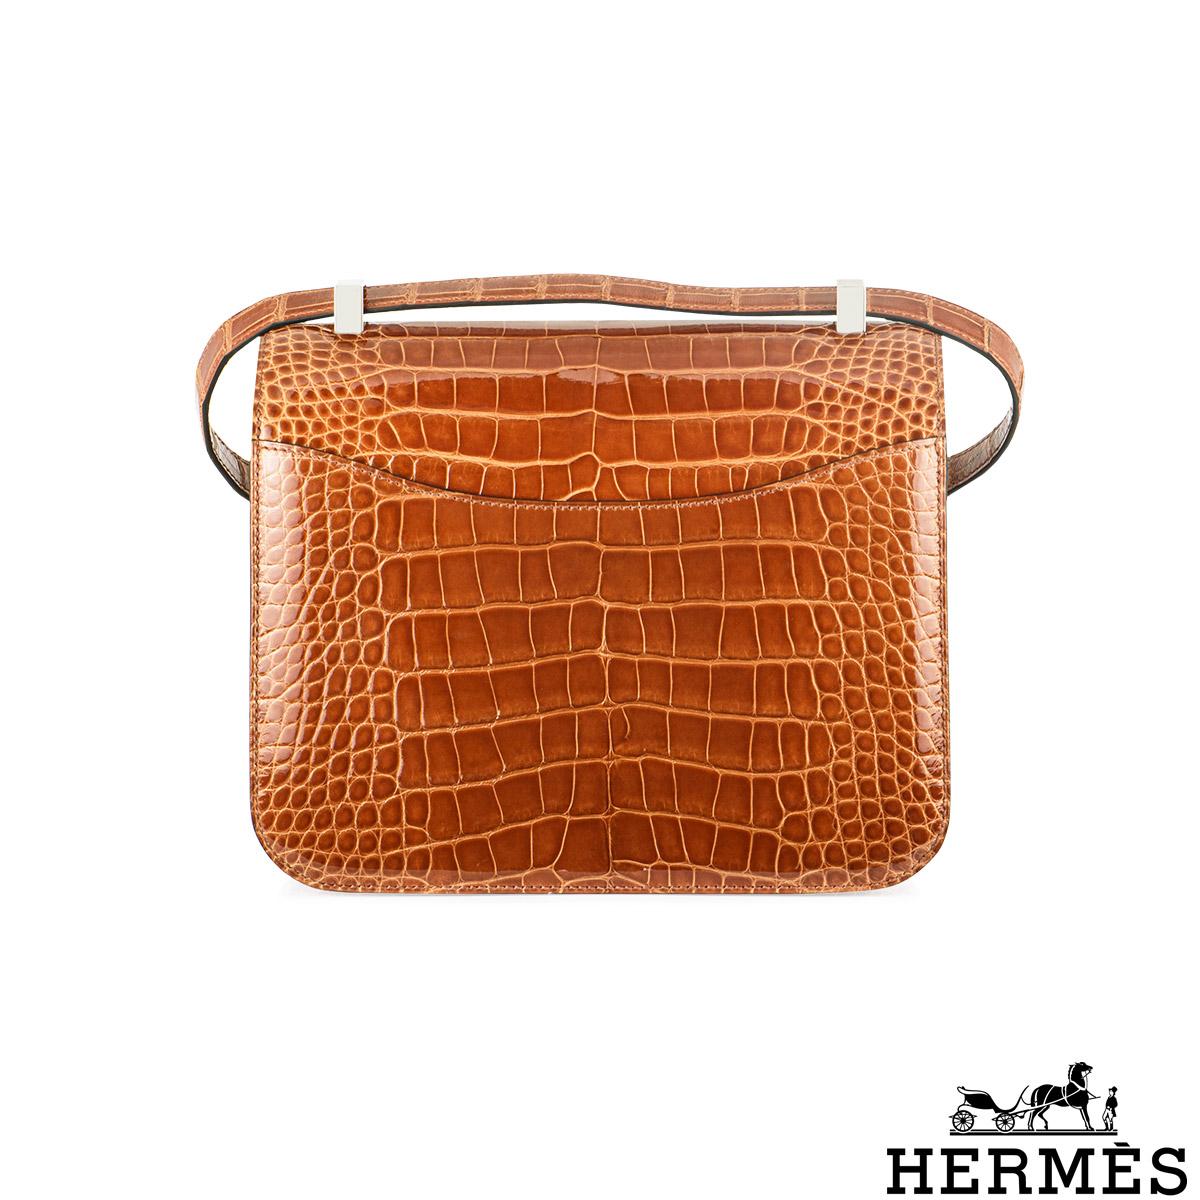 A rare and exceptional Hermès Constance 24cm Mississippiensis Alligator handbag. This exotic bag is adorned with a Lisse Mississippi Alligator in Cuivre complemented by palladium hardware. The exterior of this Constance features tonal stitchings, an